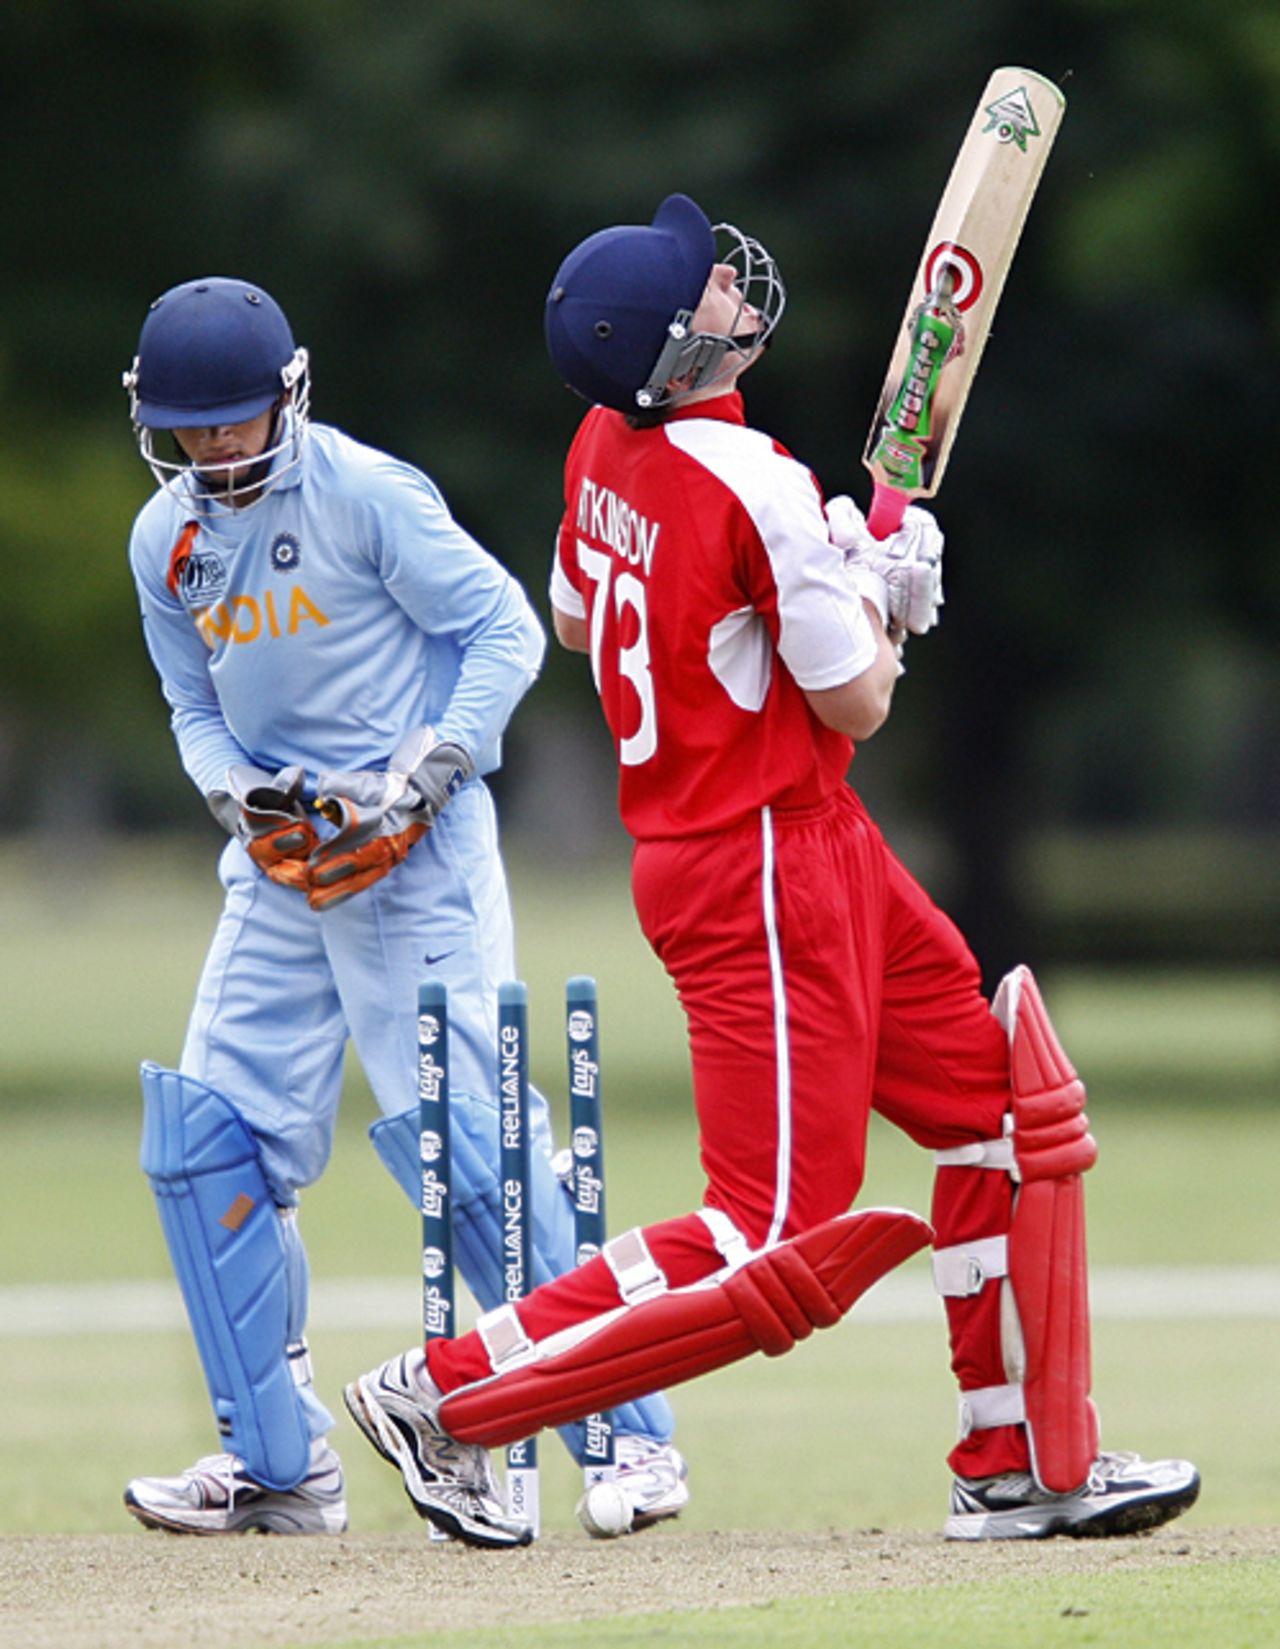 Hong Kong's captain Jamie Atkinson is bowled for 39, India Under-19s v Hong Kong Under-19s, 11th Match, Group A, ICC Under-19 World Cup, Christchurch, January 17, 2010